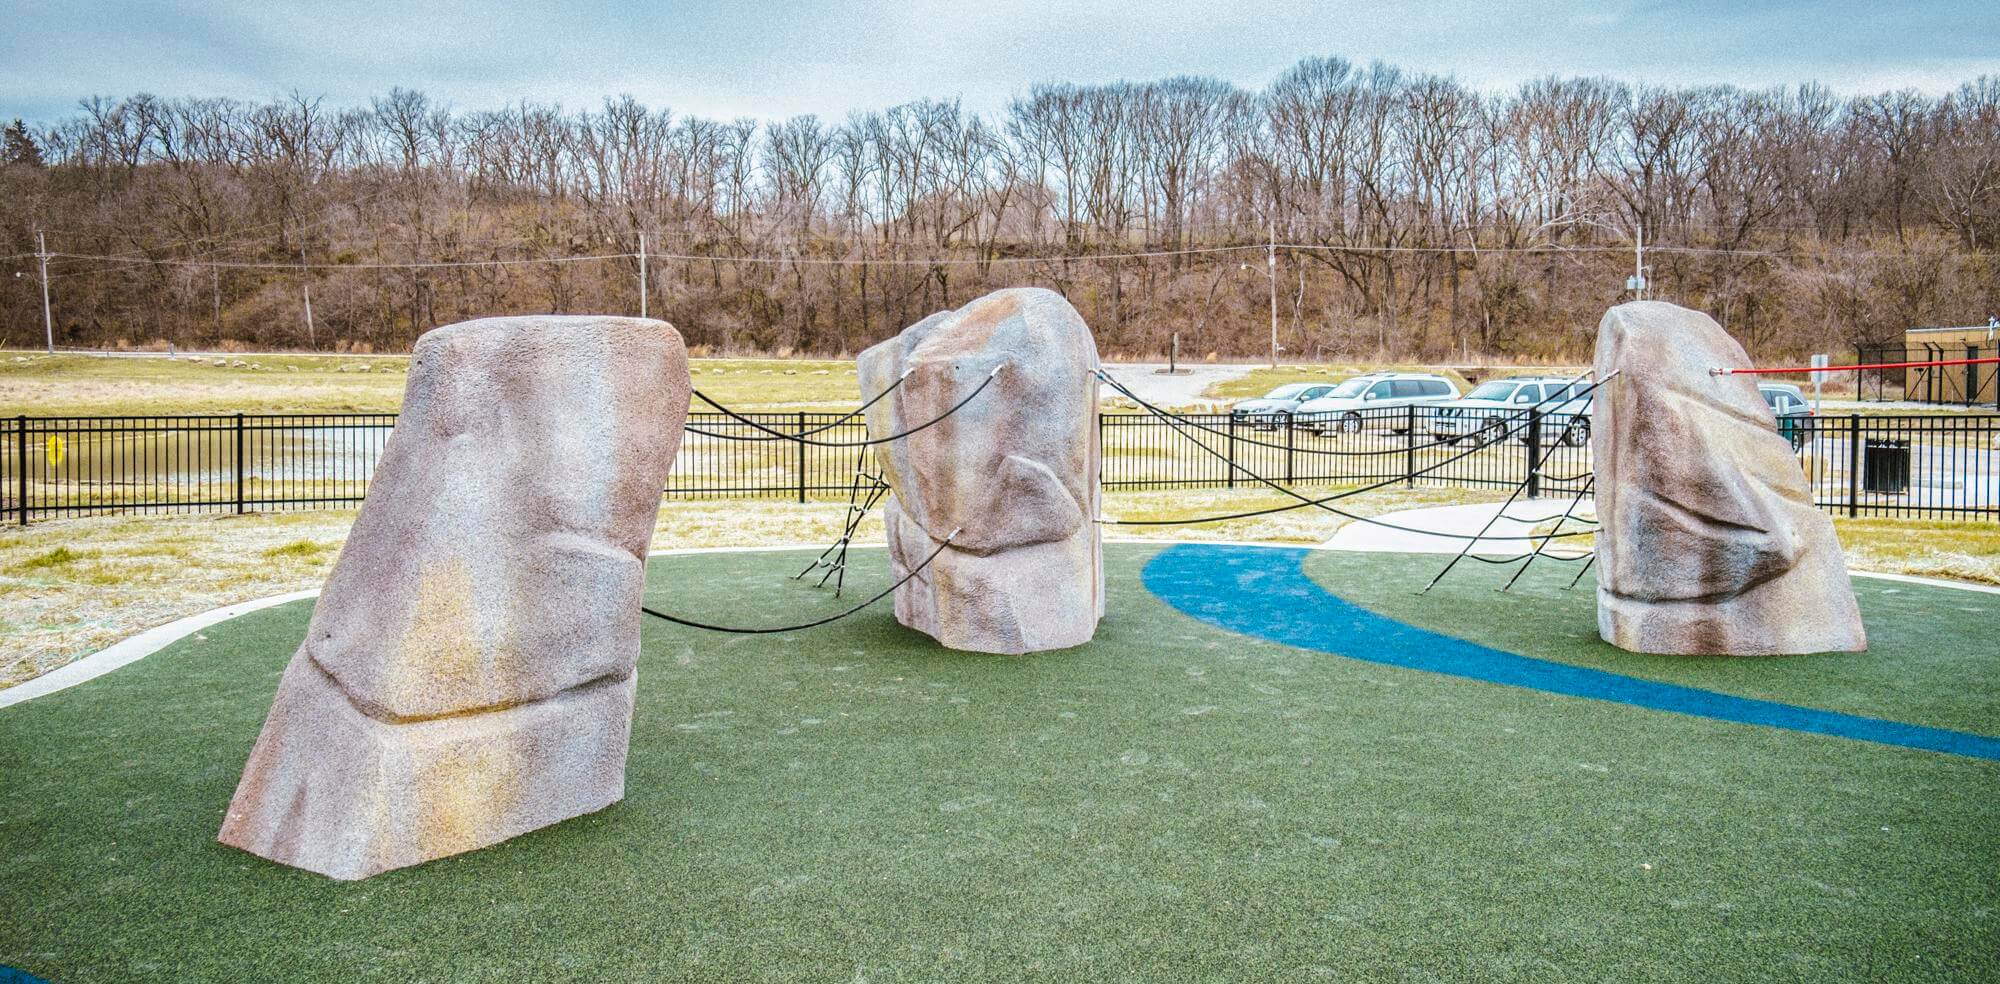 Several artificial climbing boulders with rope features are spread across a playground with a curving blue path on green turf.